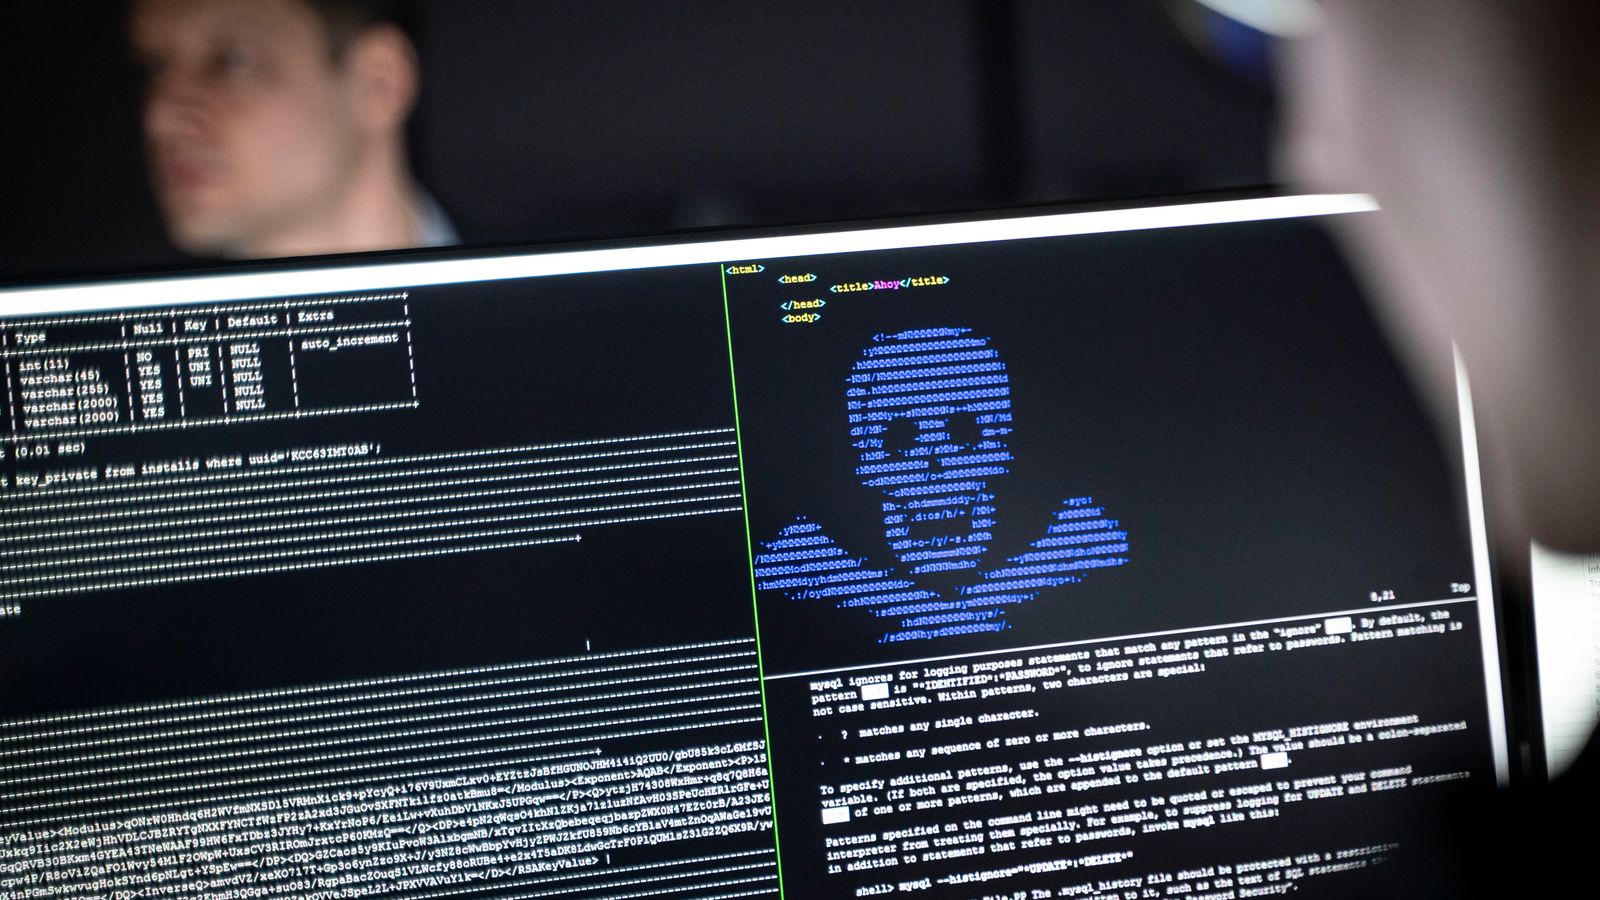 Russian-speaking hackers claim major ransomware attack which has hit hundreds of US companies